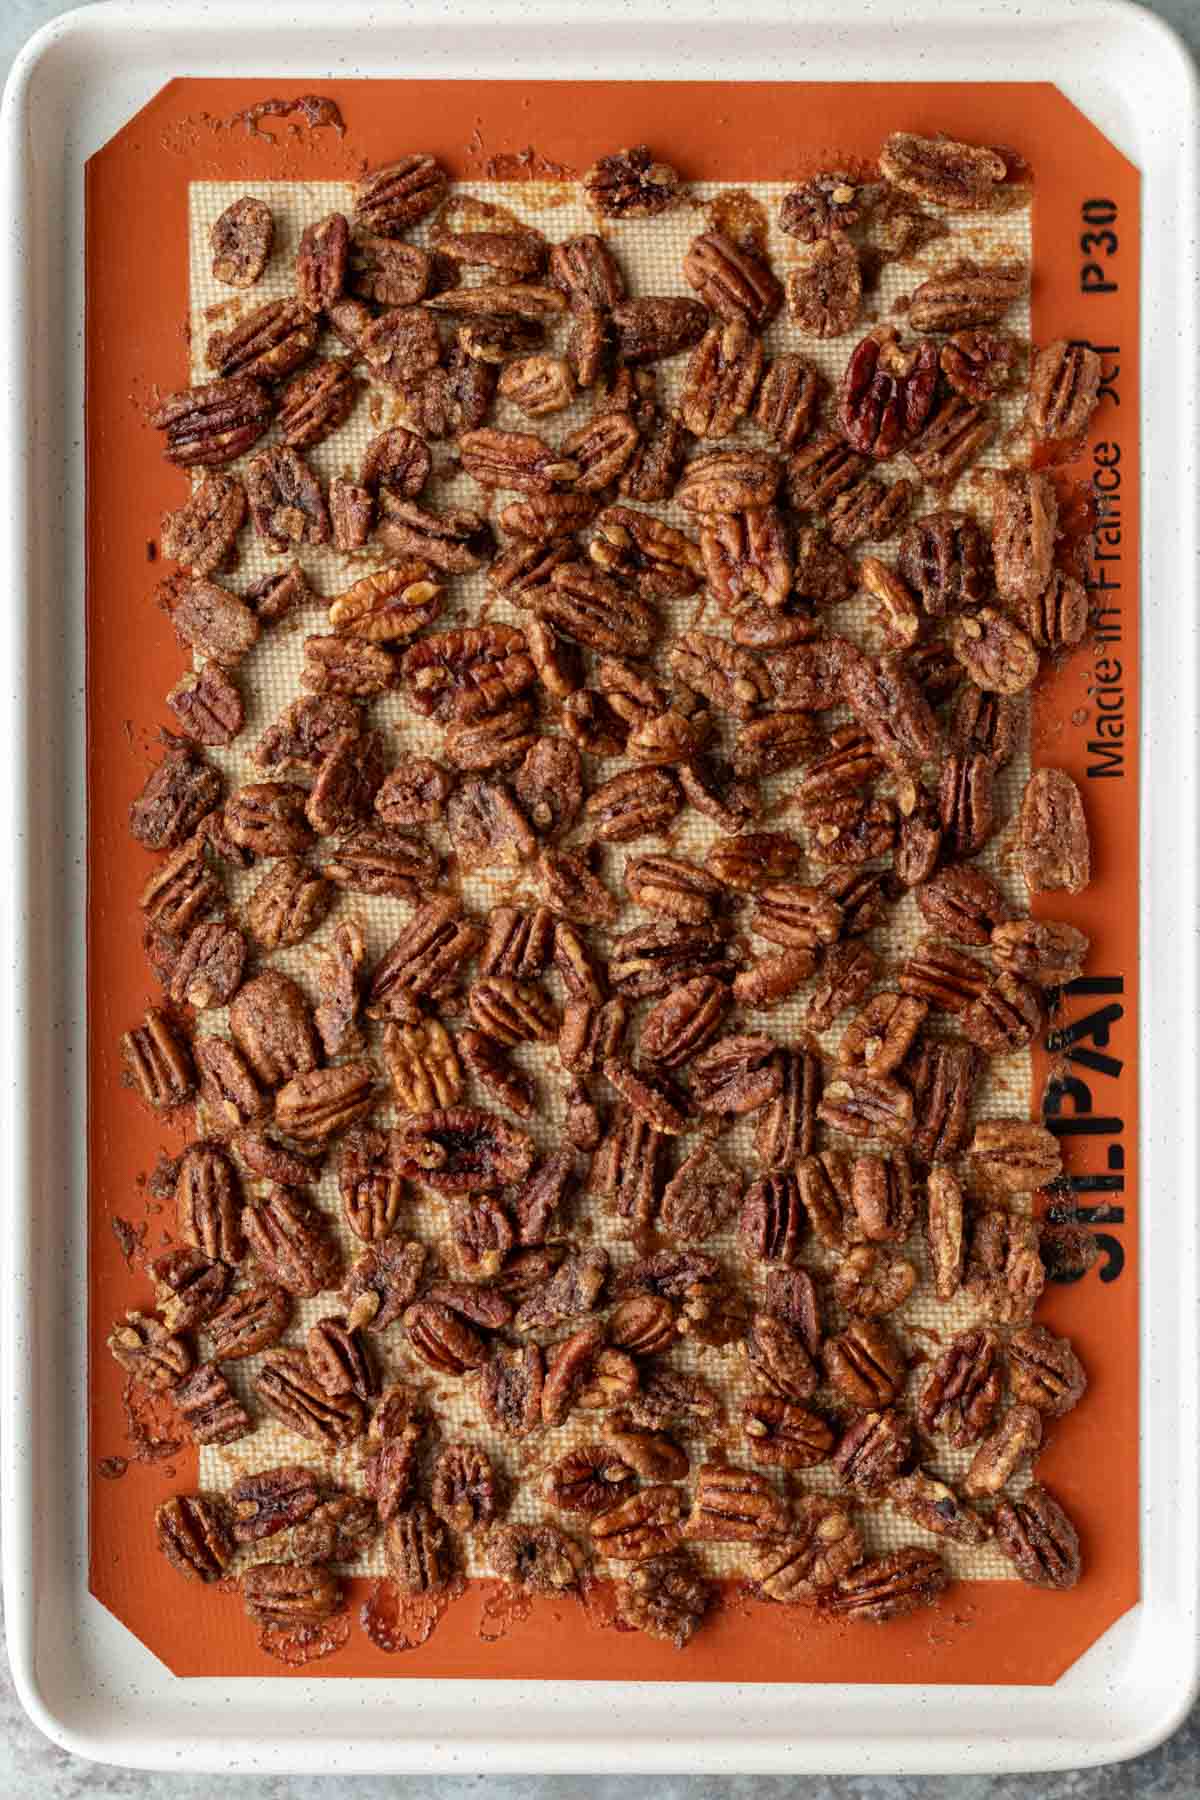 Freshly baked candied pecans cooling on a baking sheet.